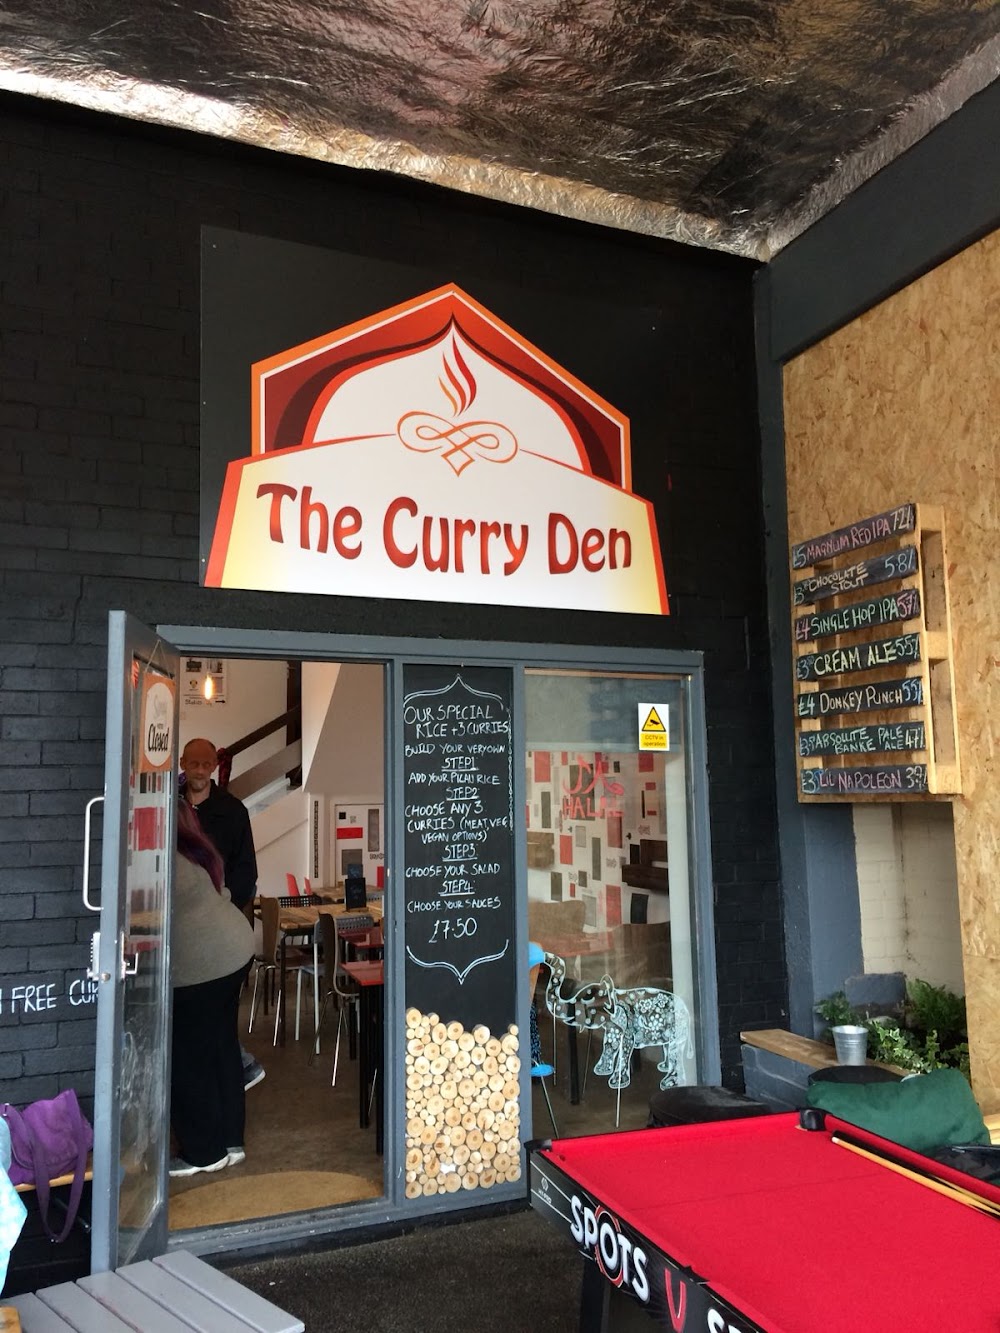 The Curry Den